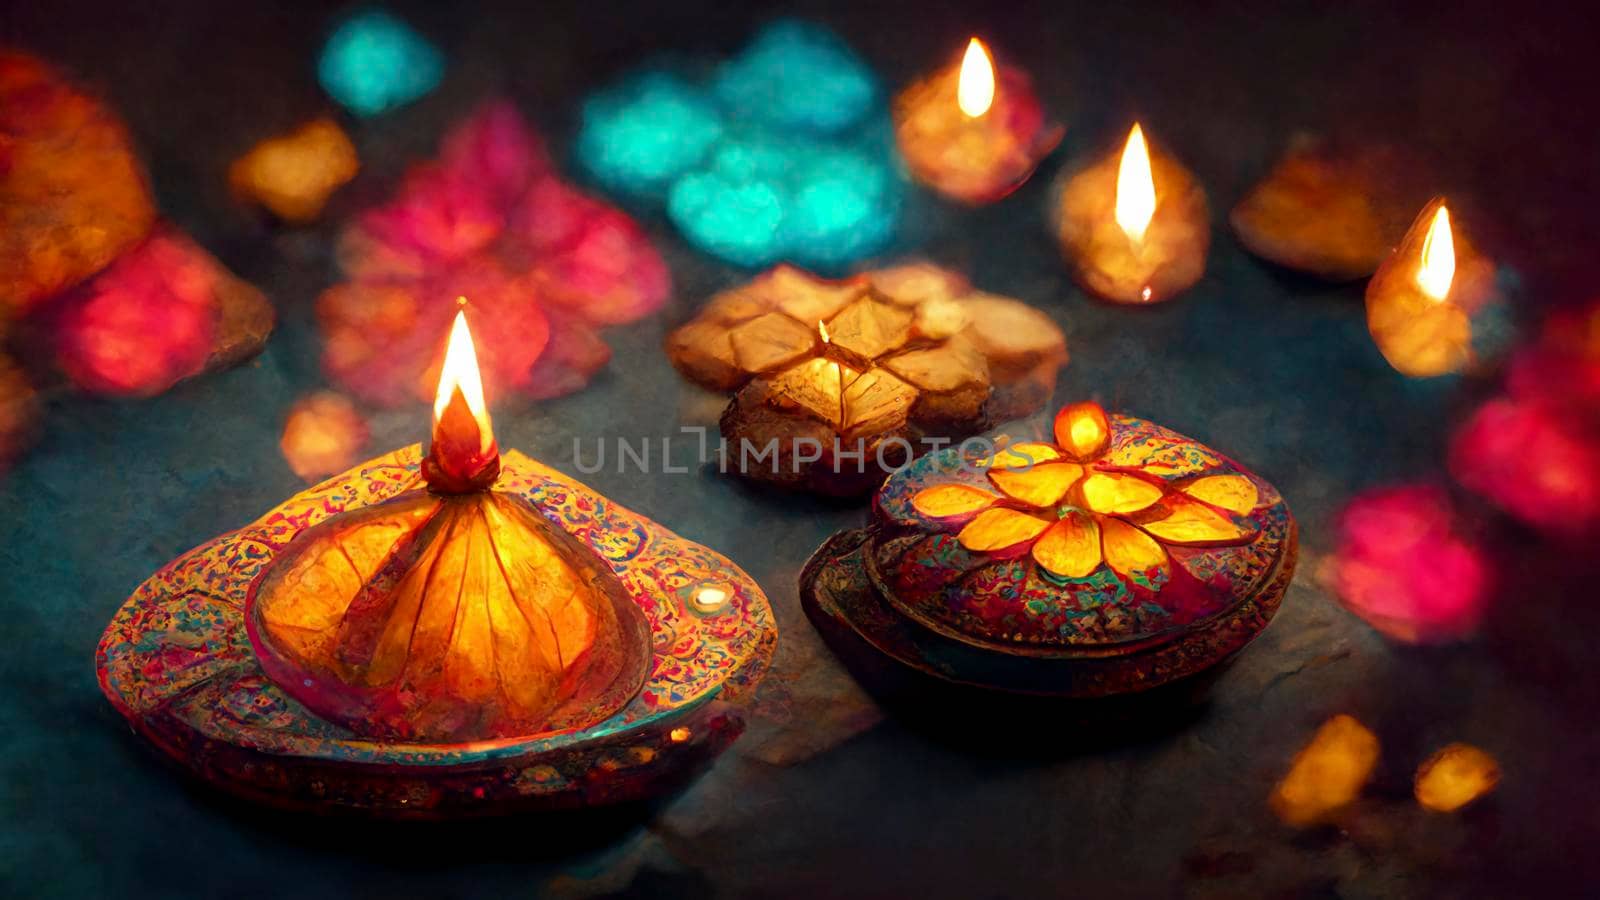 happy diwali indian festival. diwali background with candles. Diwali lanterns realistic background with candles and blurred lights.